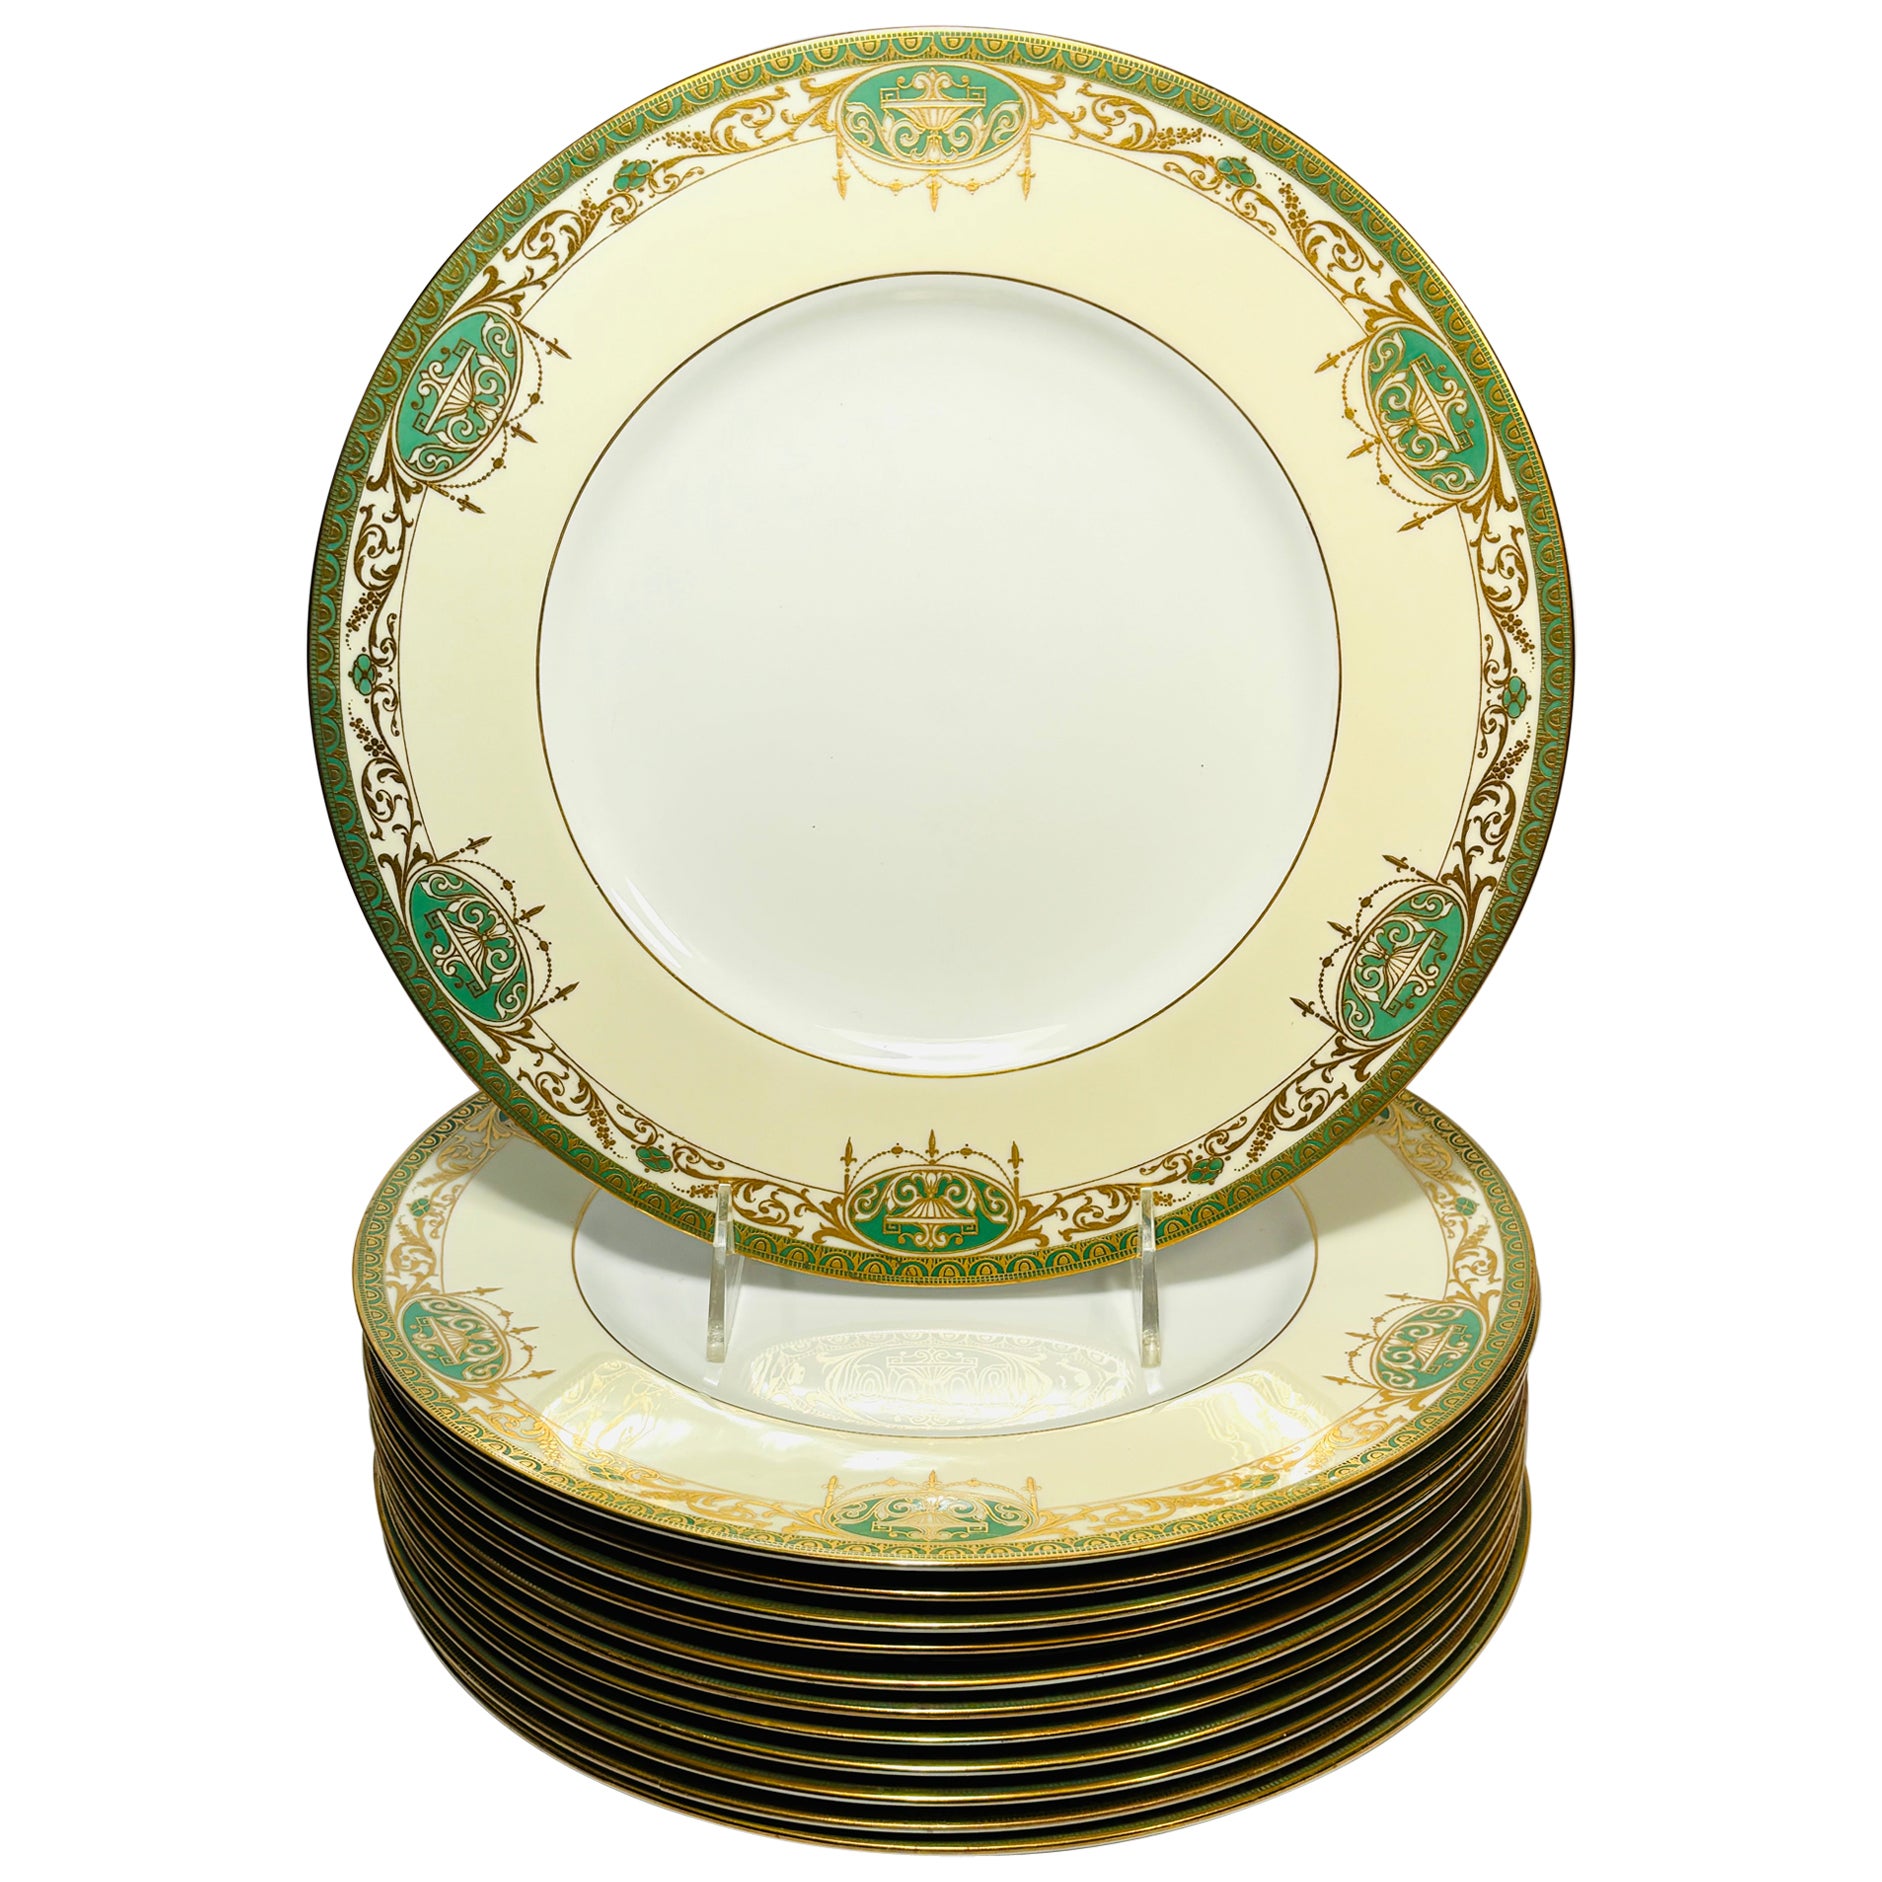 12 Antique English Green & Embossed Gilt Dinner Plates, Neo Classical Motif